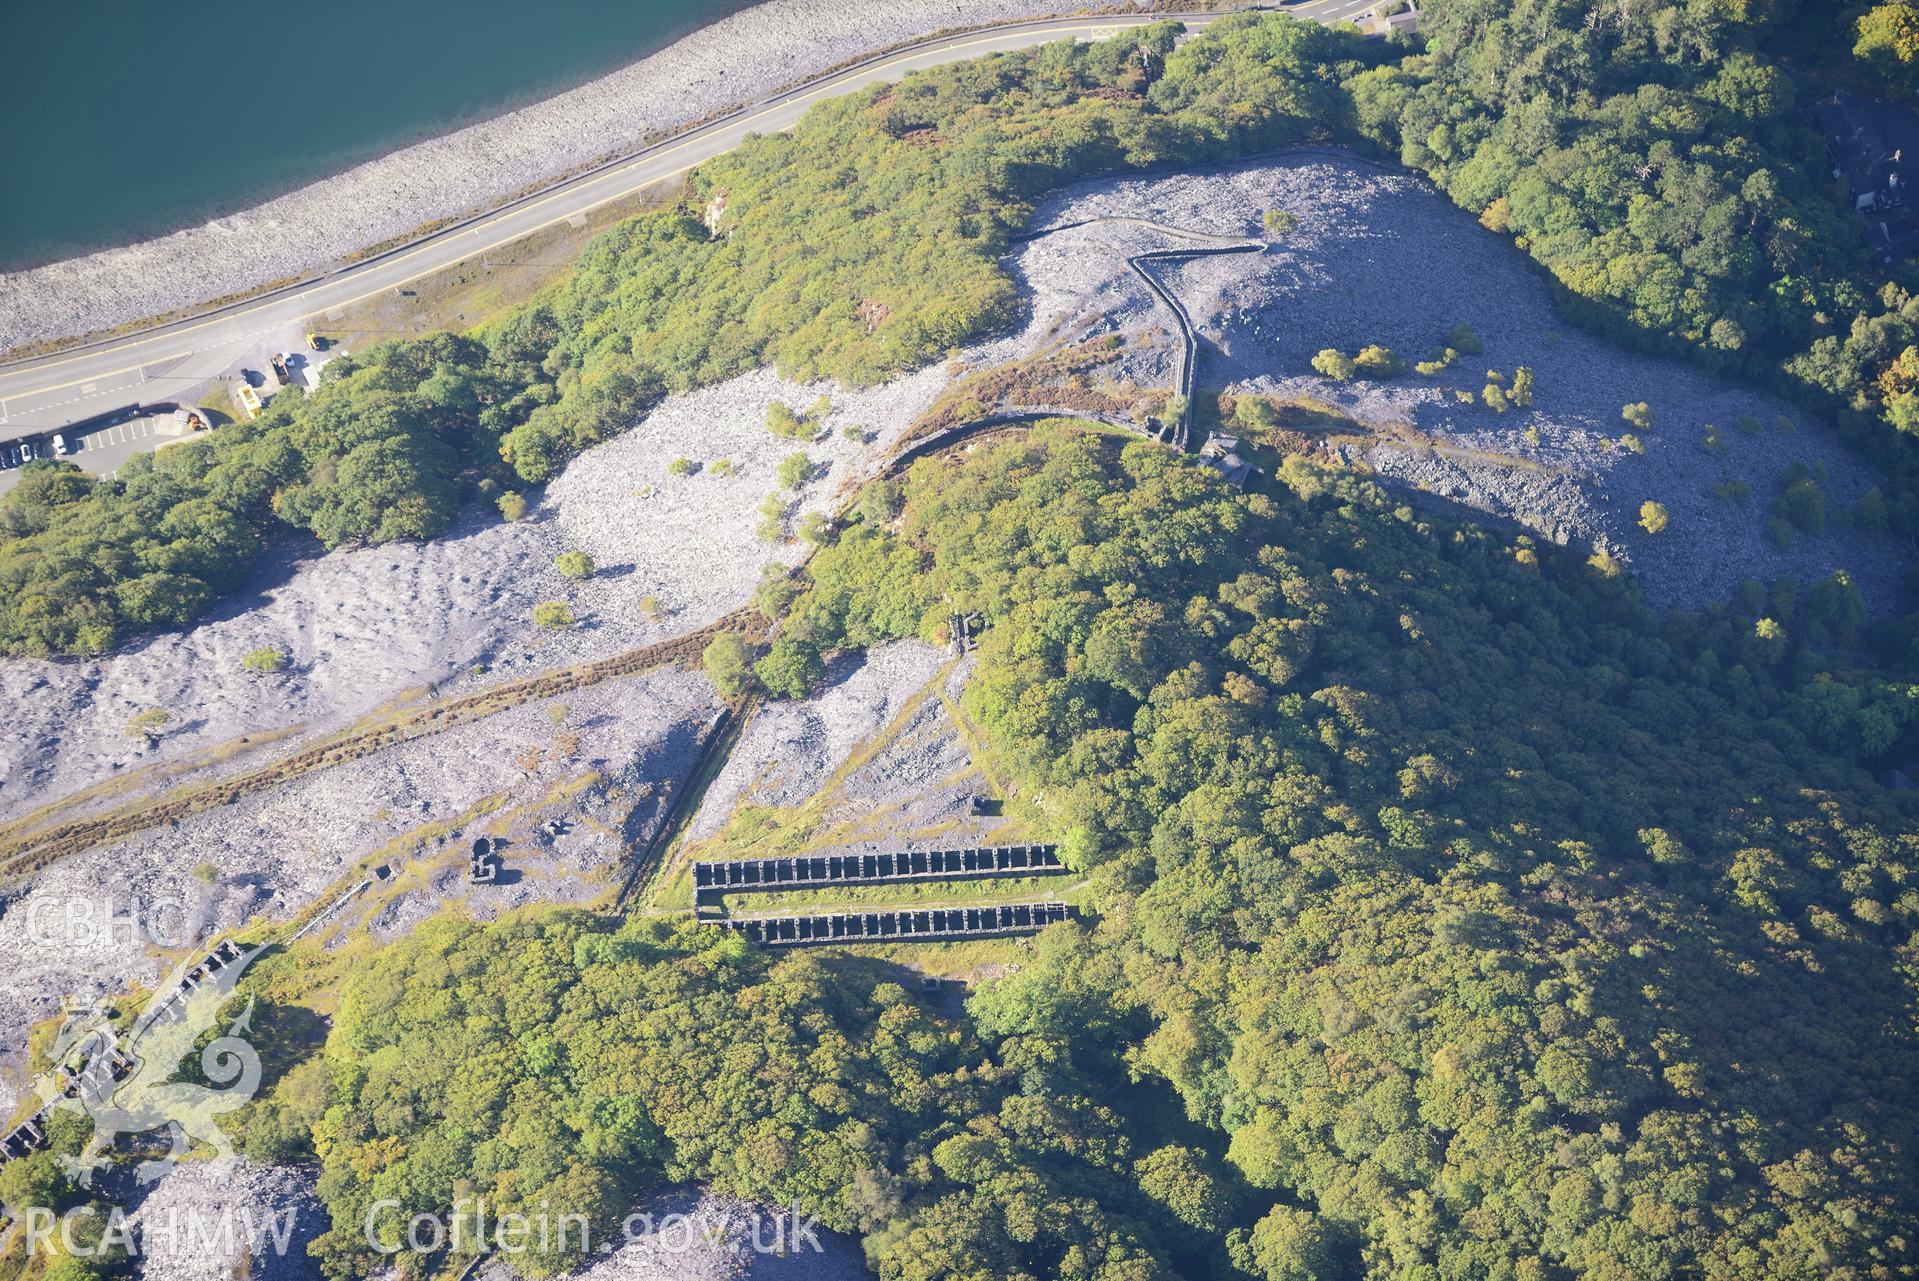 Dinorwic quarry barracks, Llanberis. Oblique aerial photograph taken during the Royal Commission's programme of archaeological aerial reconnaissance by Toby Driver on 2nd October 2015.